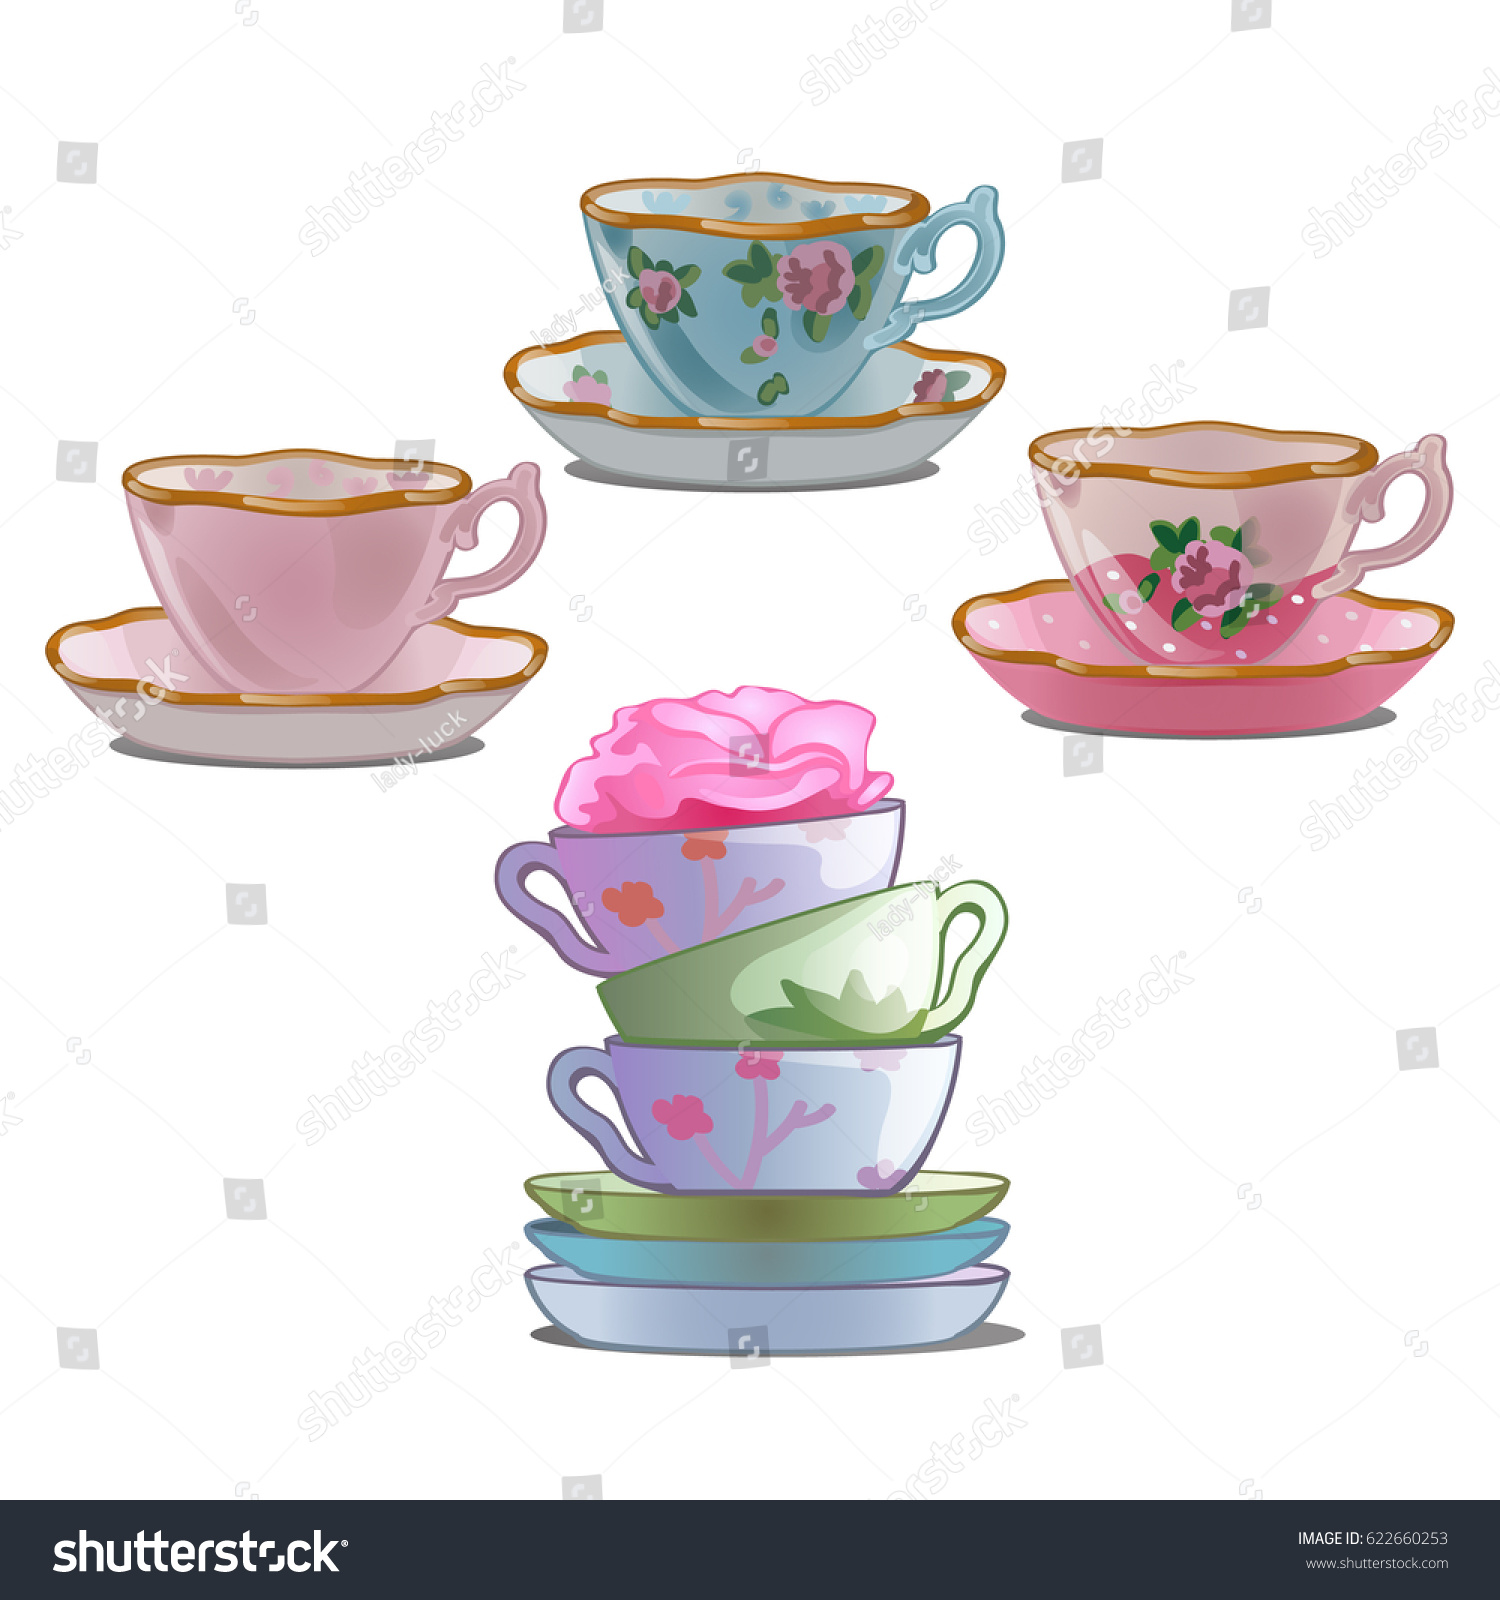 The set of dishes of Chinese porcelain for the tea ceremony isolated on white background. Vector cartoon close-up illustration. #622660253